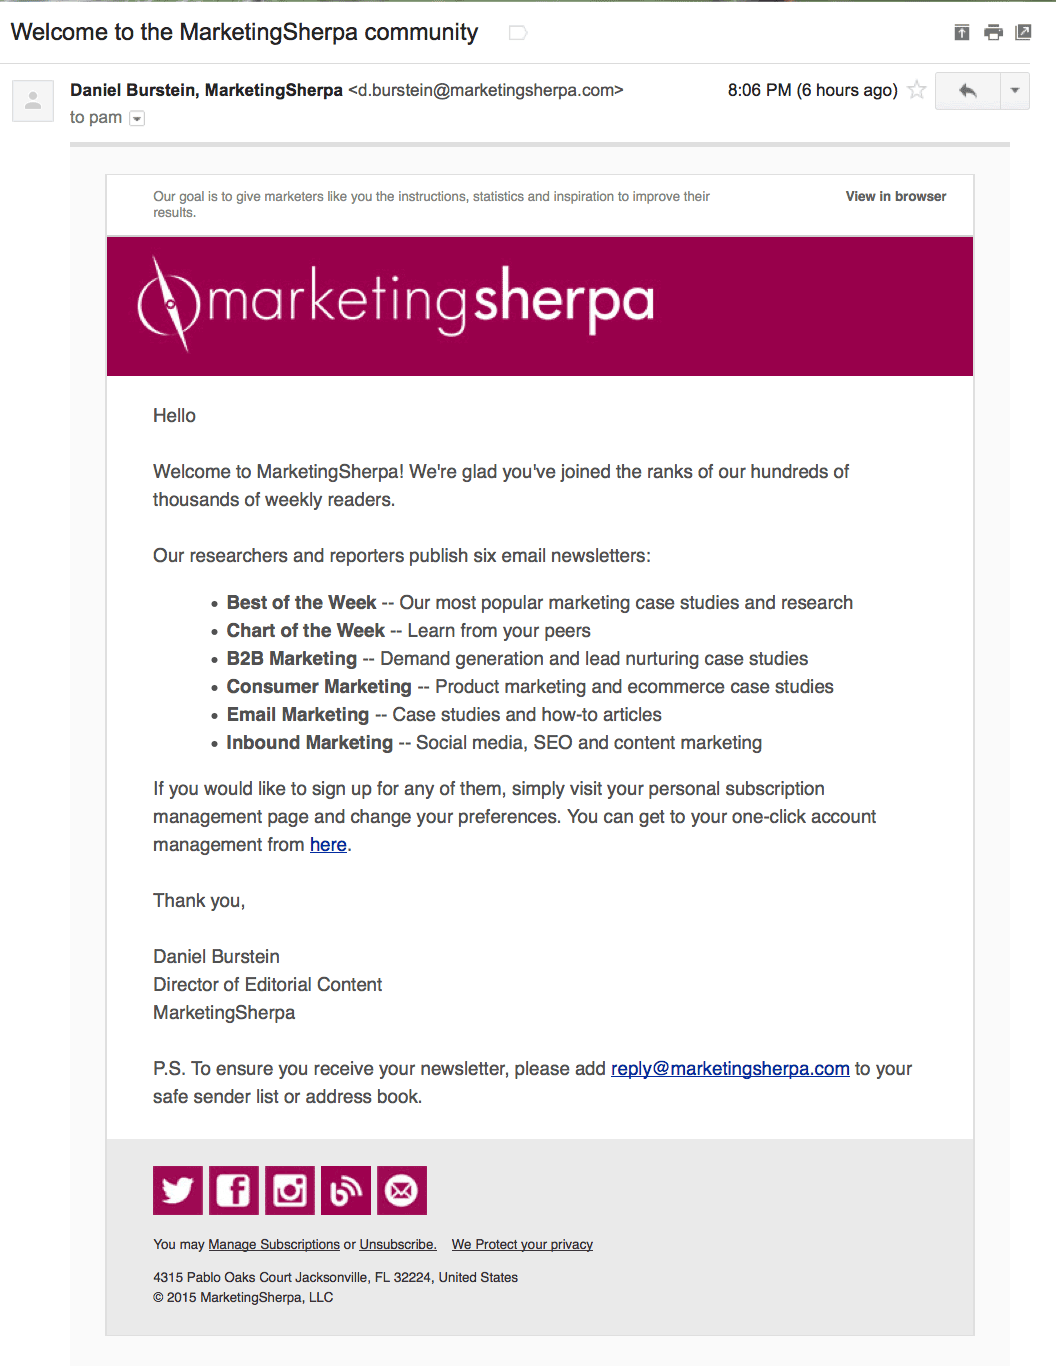 Marketing Sherpa Welcome email